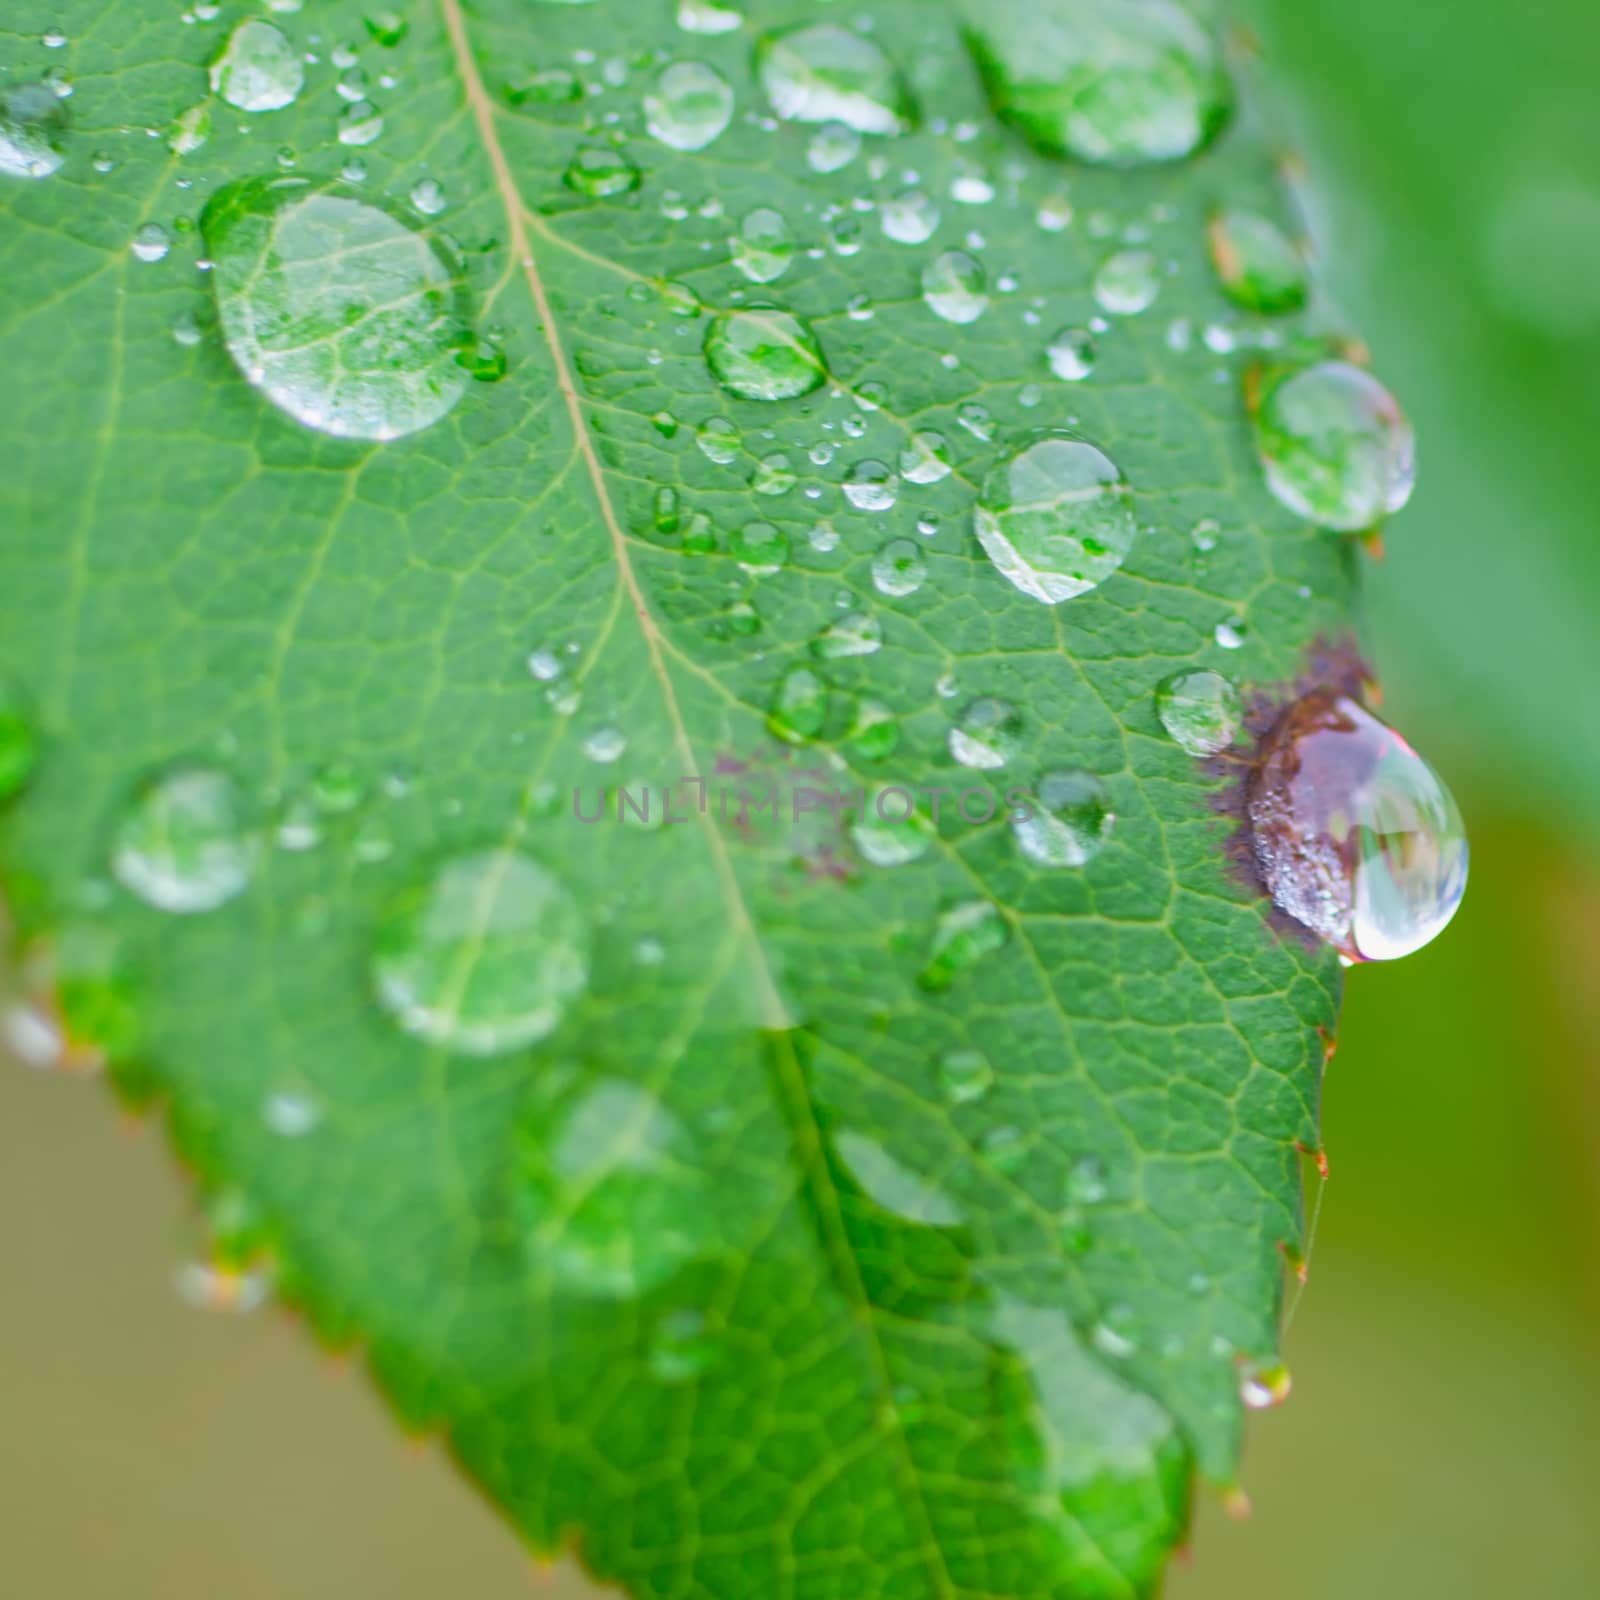 Leaf with drops by Koufax73